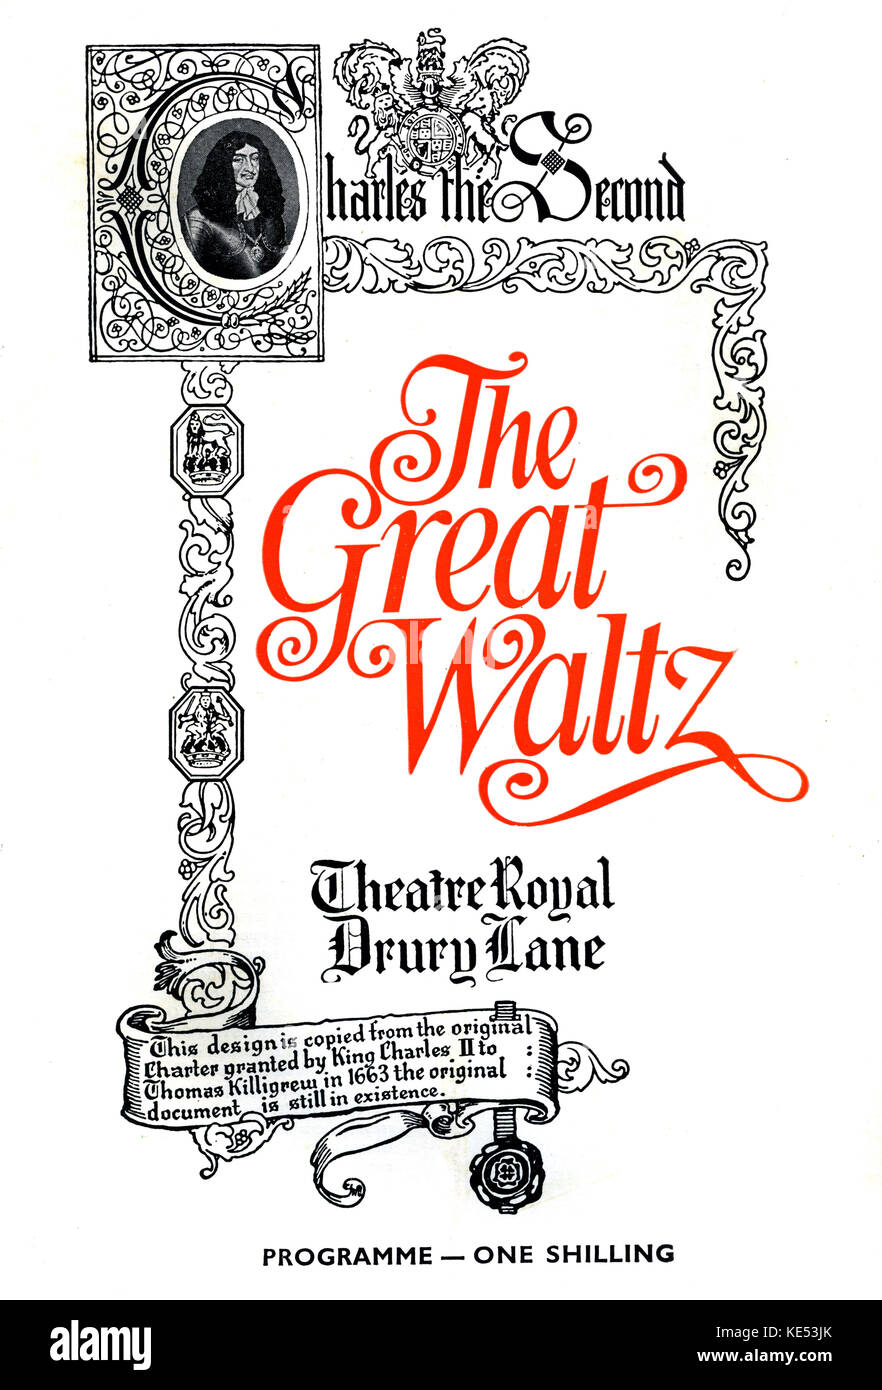 The Great Waltz programme cover. Musical romance on life of Johann Strauss, musical adaptation by Erich Wolfgang Korngold. Lyrics by Wright and Forrest, book by Jerome Chodorov. Performed at Theatre Royal, Drury Lane, London from July 1970. Stock Photo